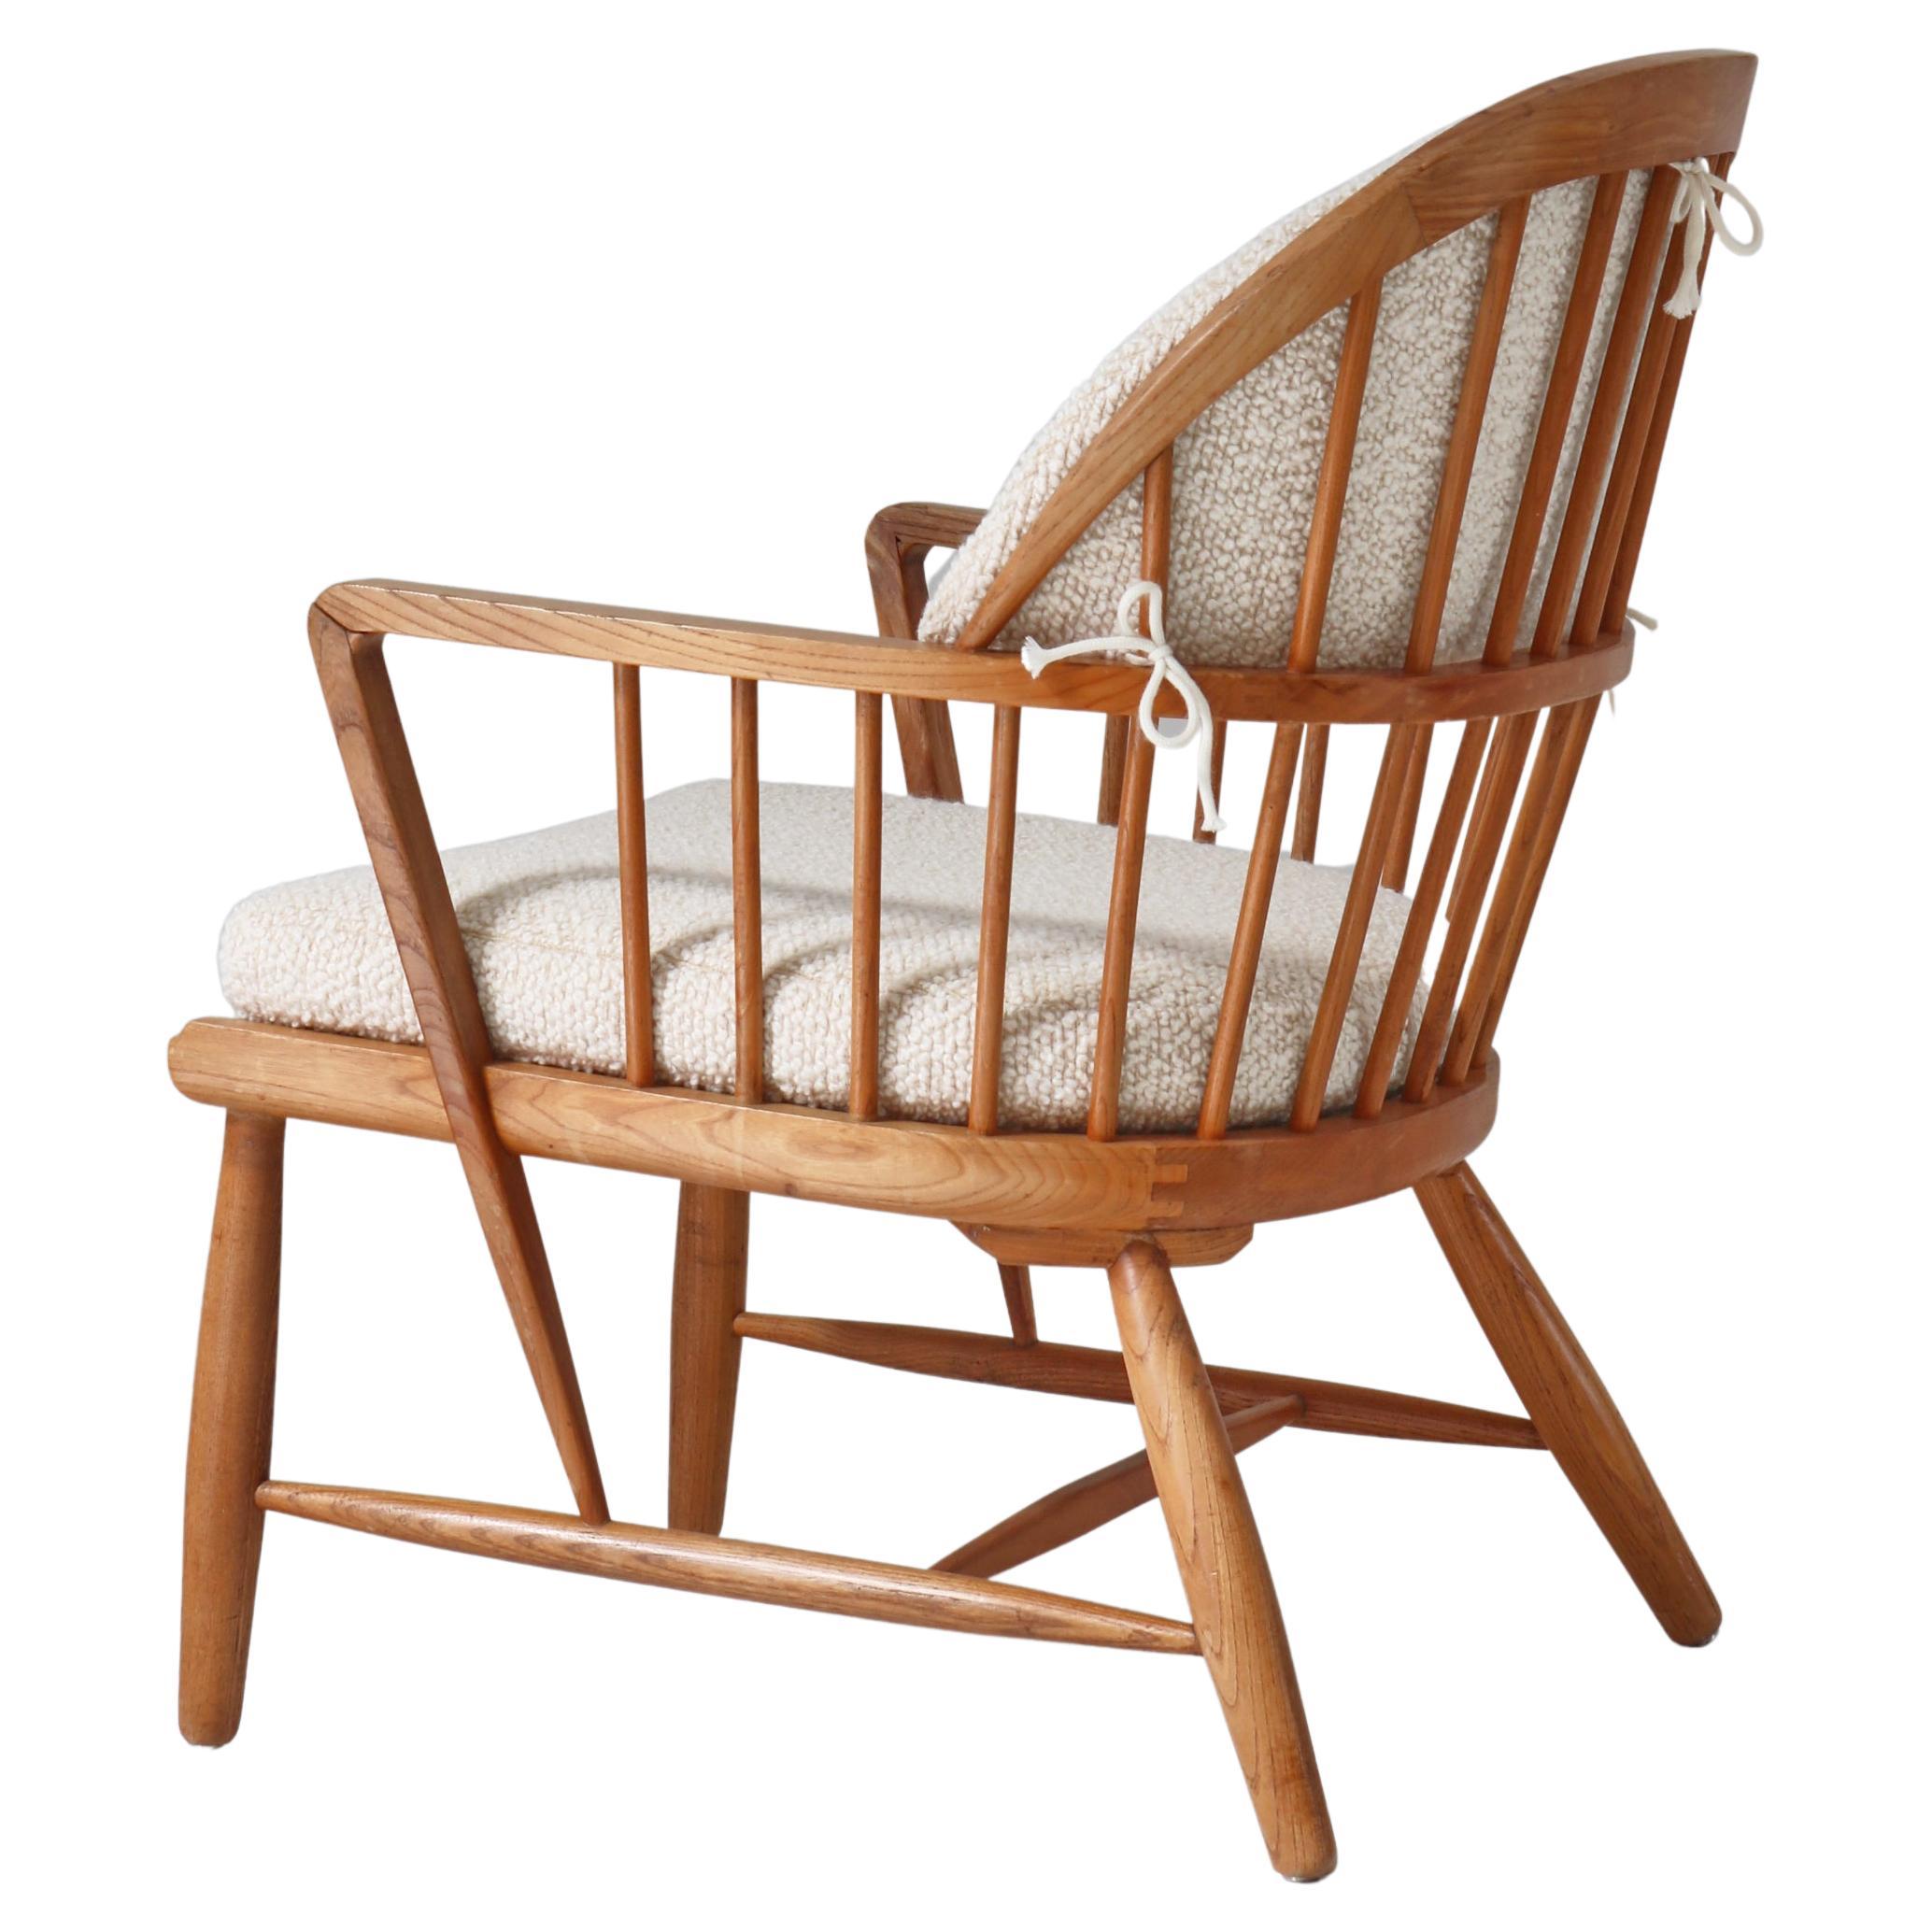 Scandinavian Modern Windsor Chair in Patinated Ash and White Bouclé, 1940s For Sale